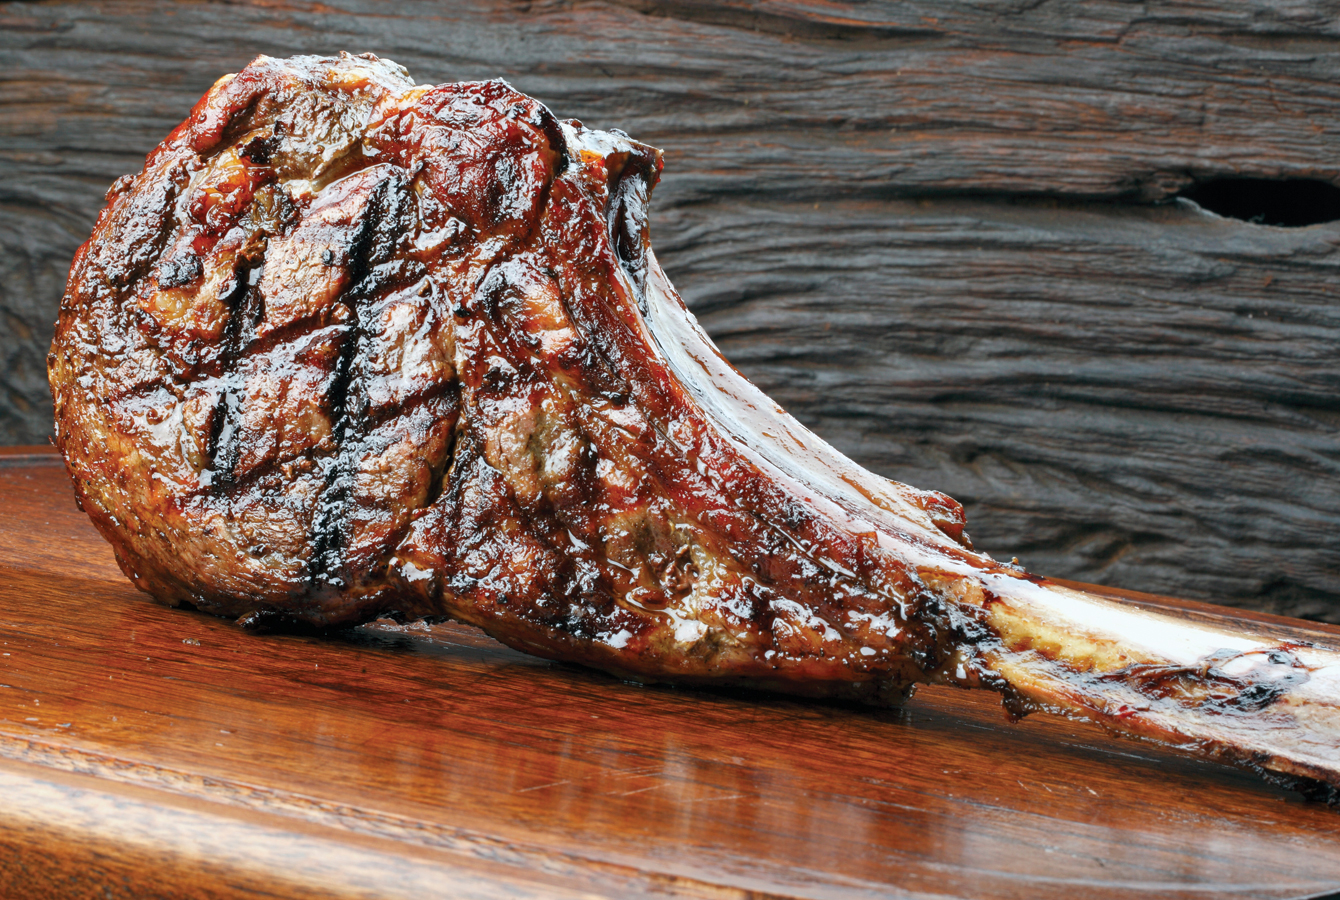 A grilled Tomahawk steaks with grill marks on it, ready to be served and enjoyed.